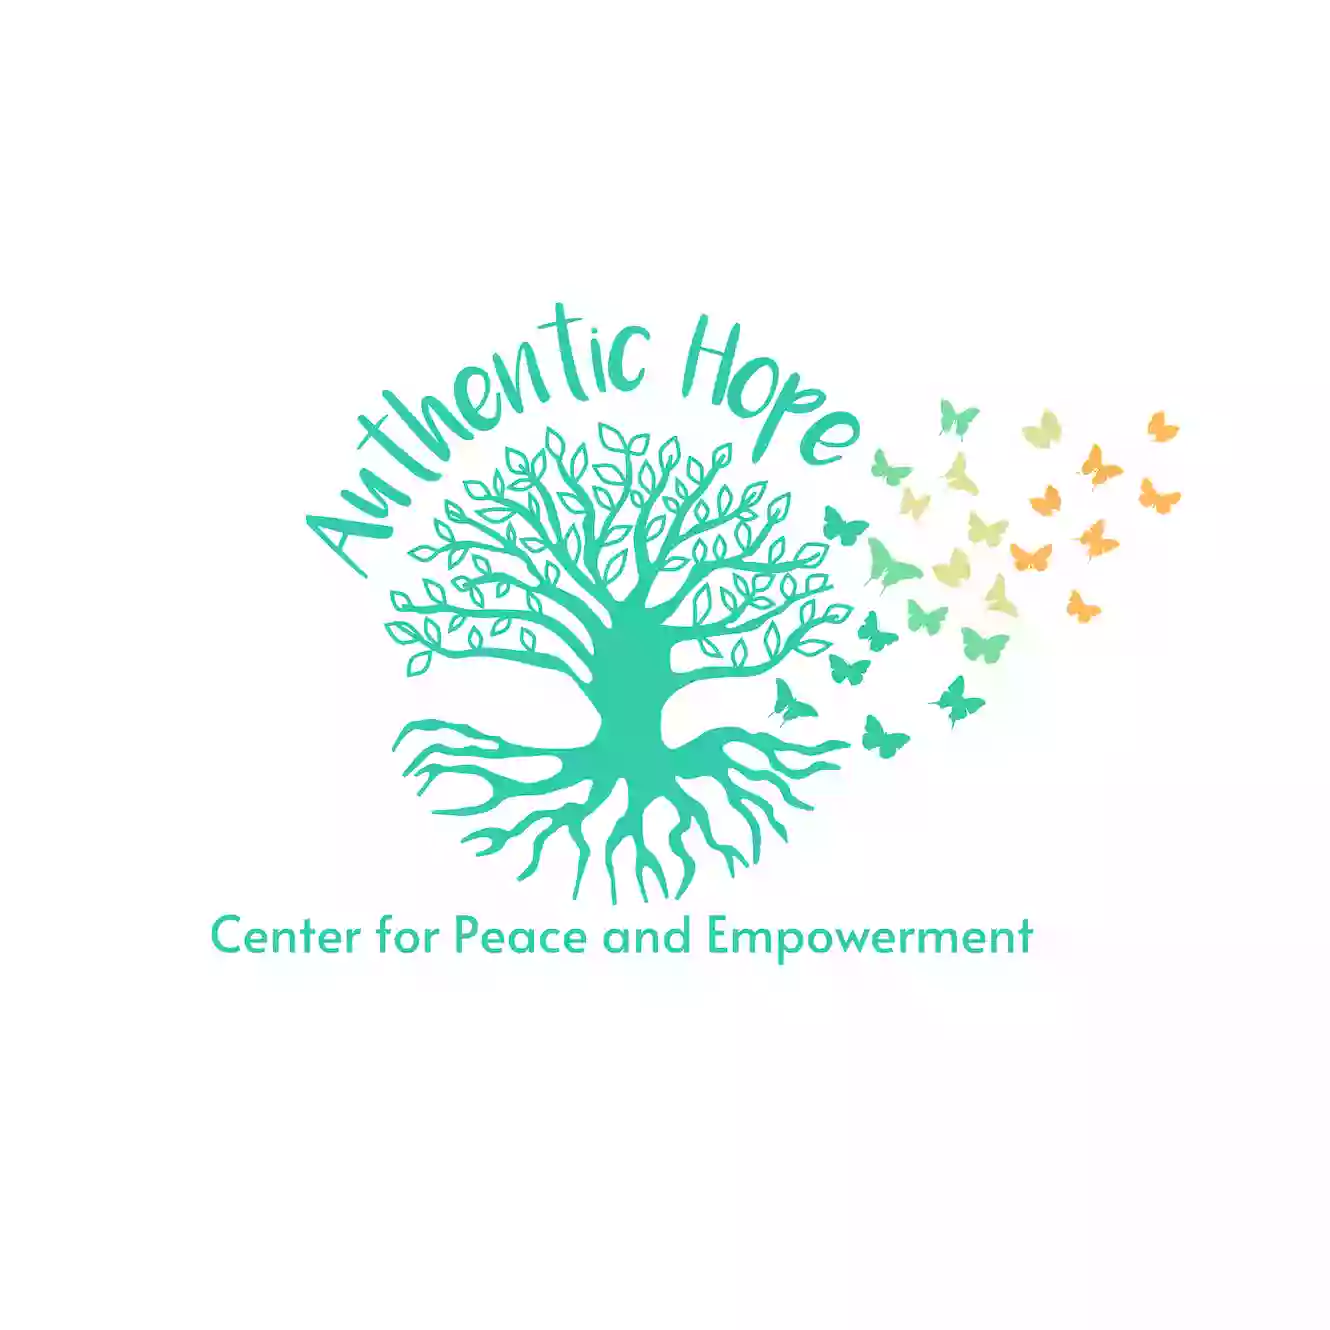 Authentic Hope- Center for Peace and Empowerment